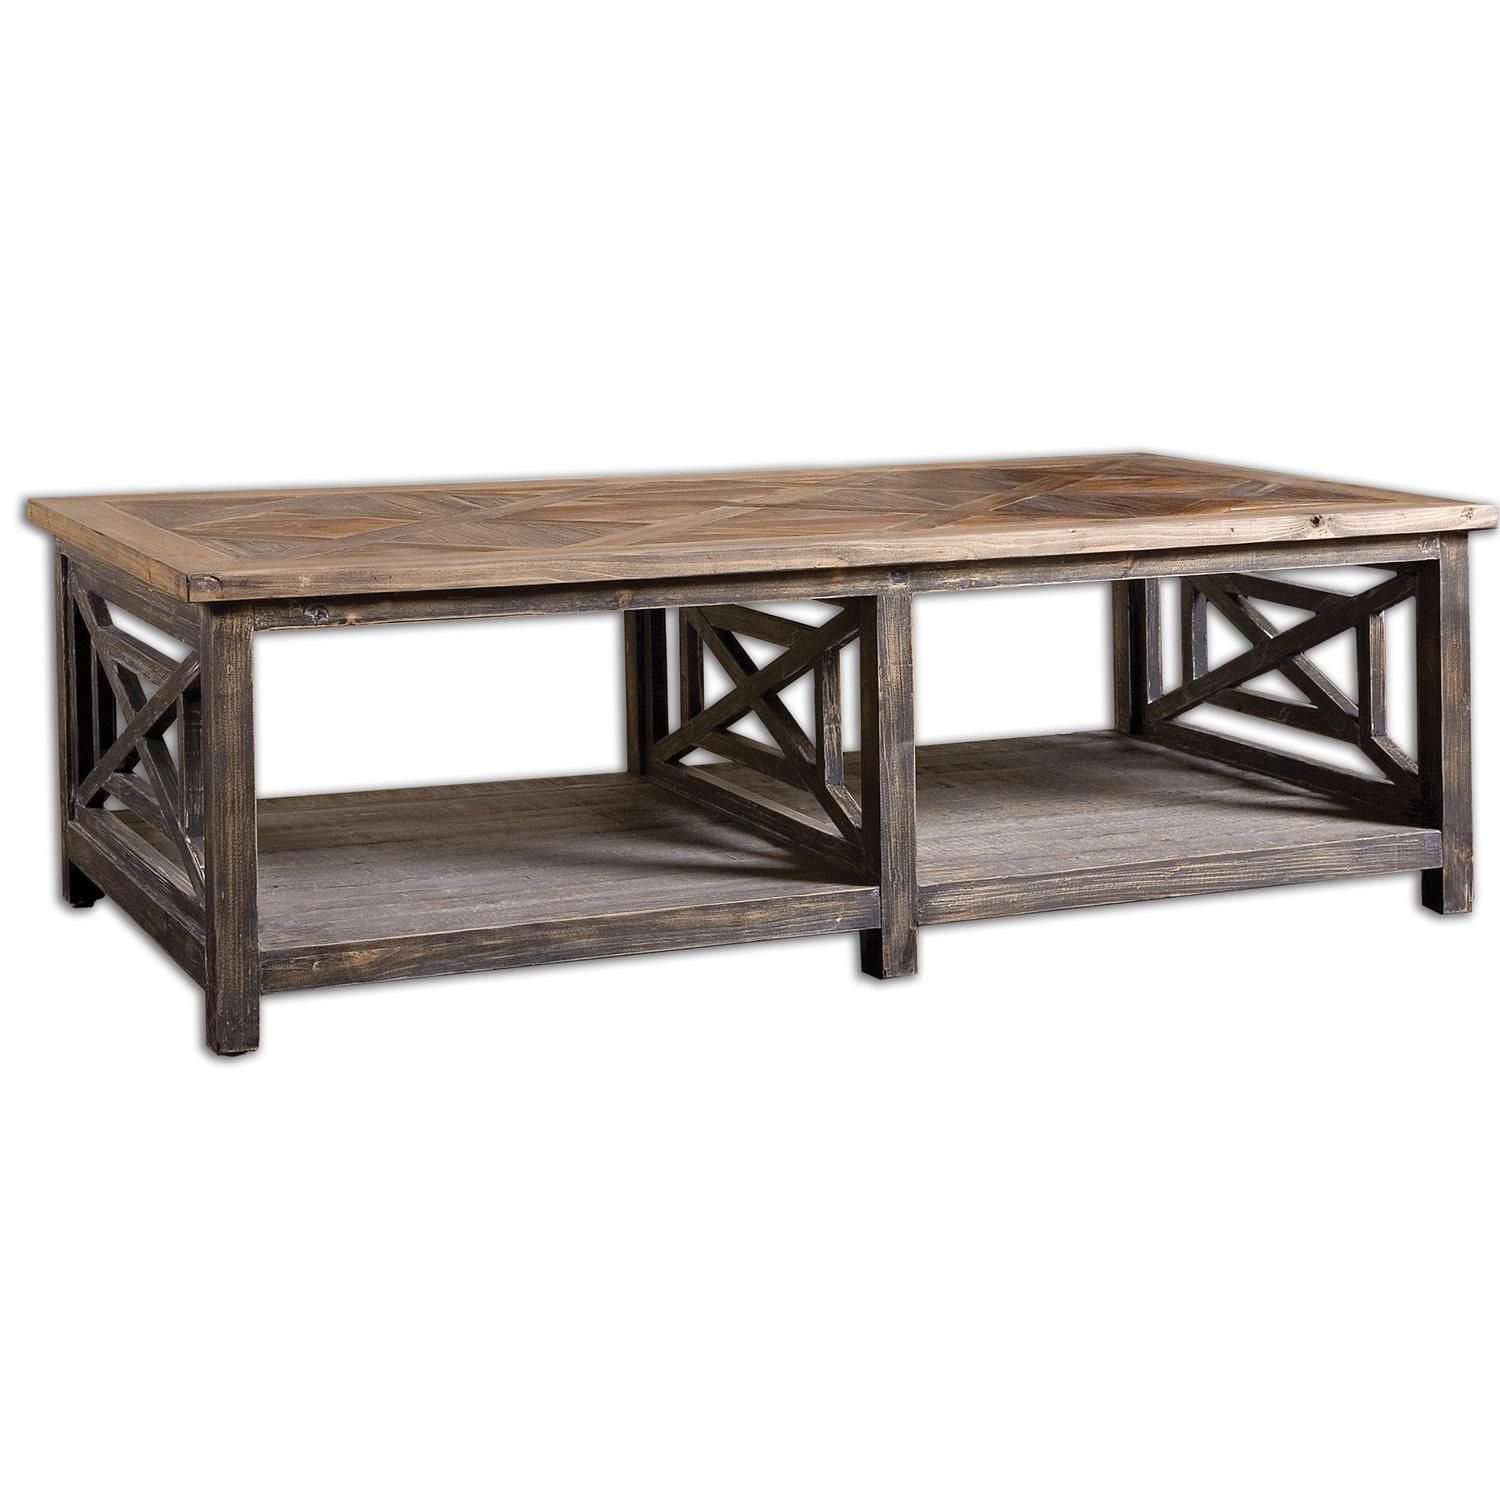 56" Carter Rustic Black & Gray Criss Cross Patterned Reclaimed Wood Throughout Wood And Dark Bronze Criss Cross Desks (View 10 of 15)